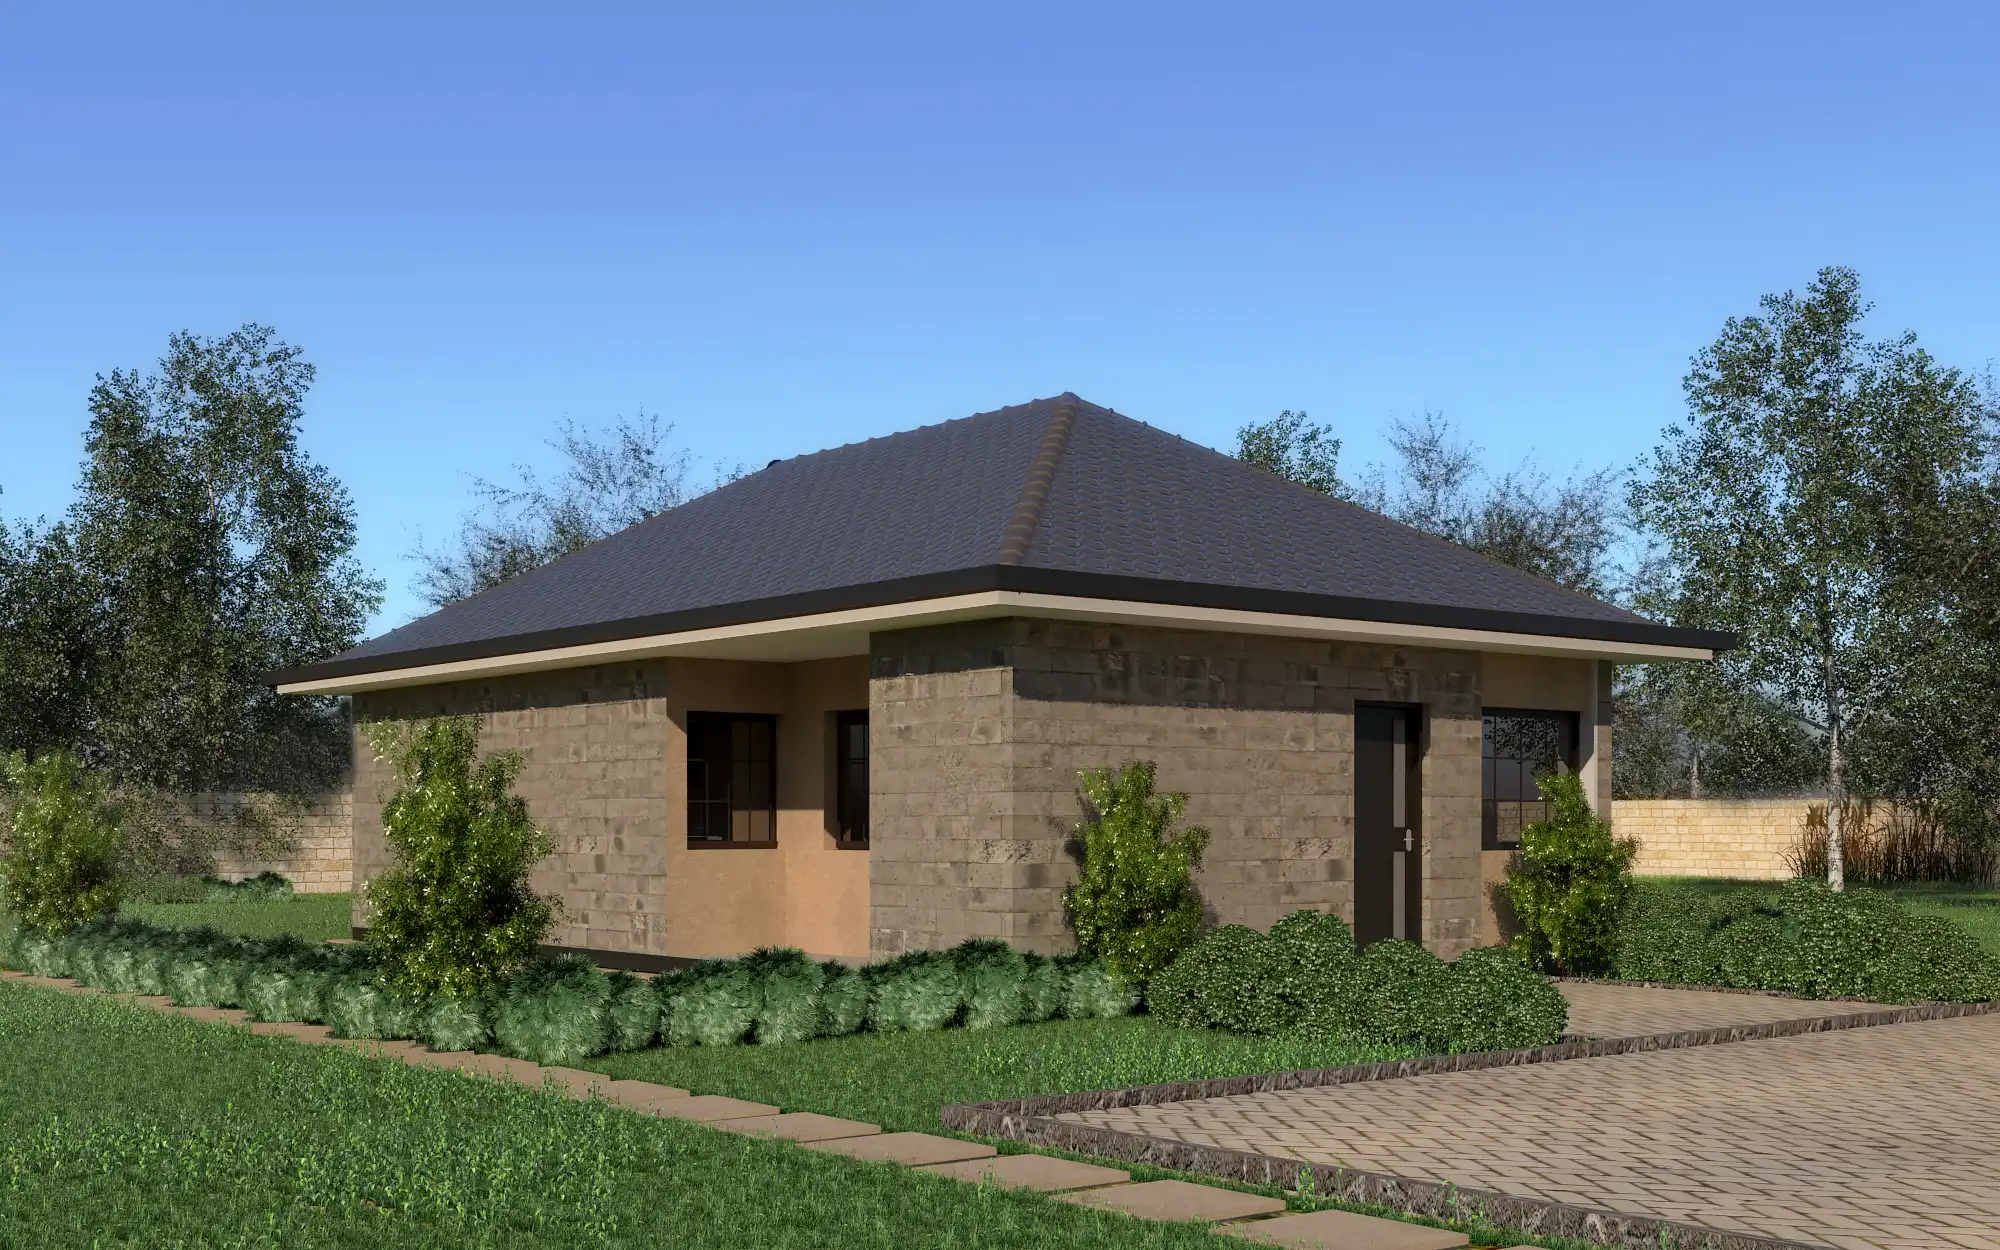 3 Bedroom Bungalow - ID 3181 - Front from Inuua Tujenge house plans with 3 bedrooms and 1 bathrooms. ( bungalow )